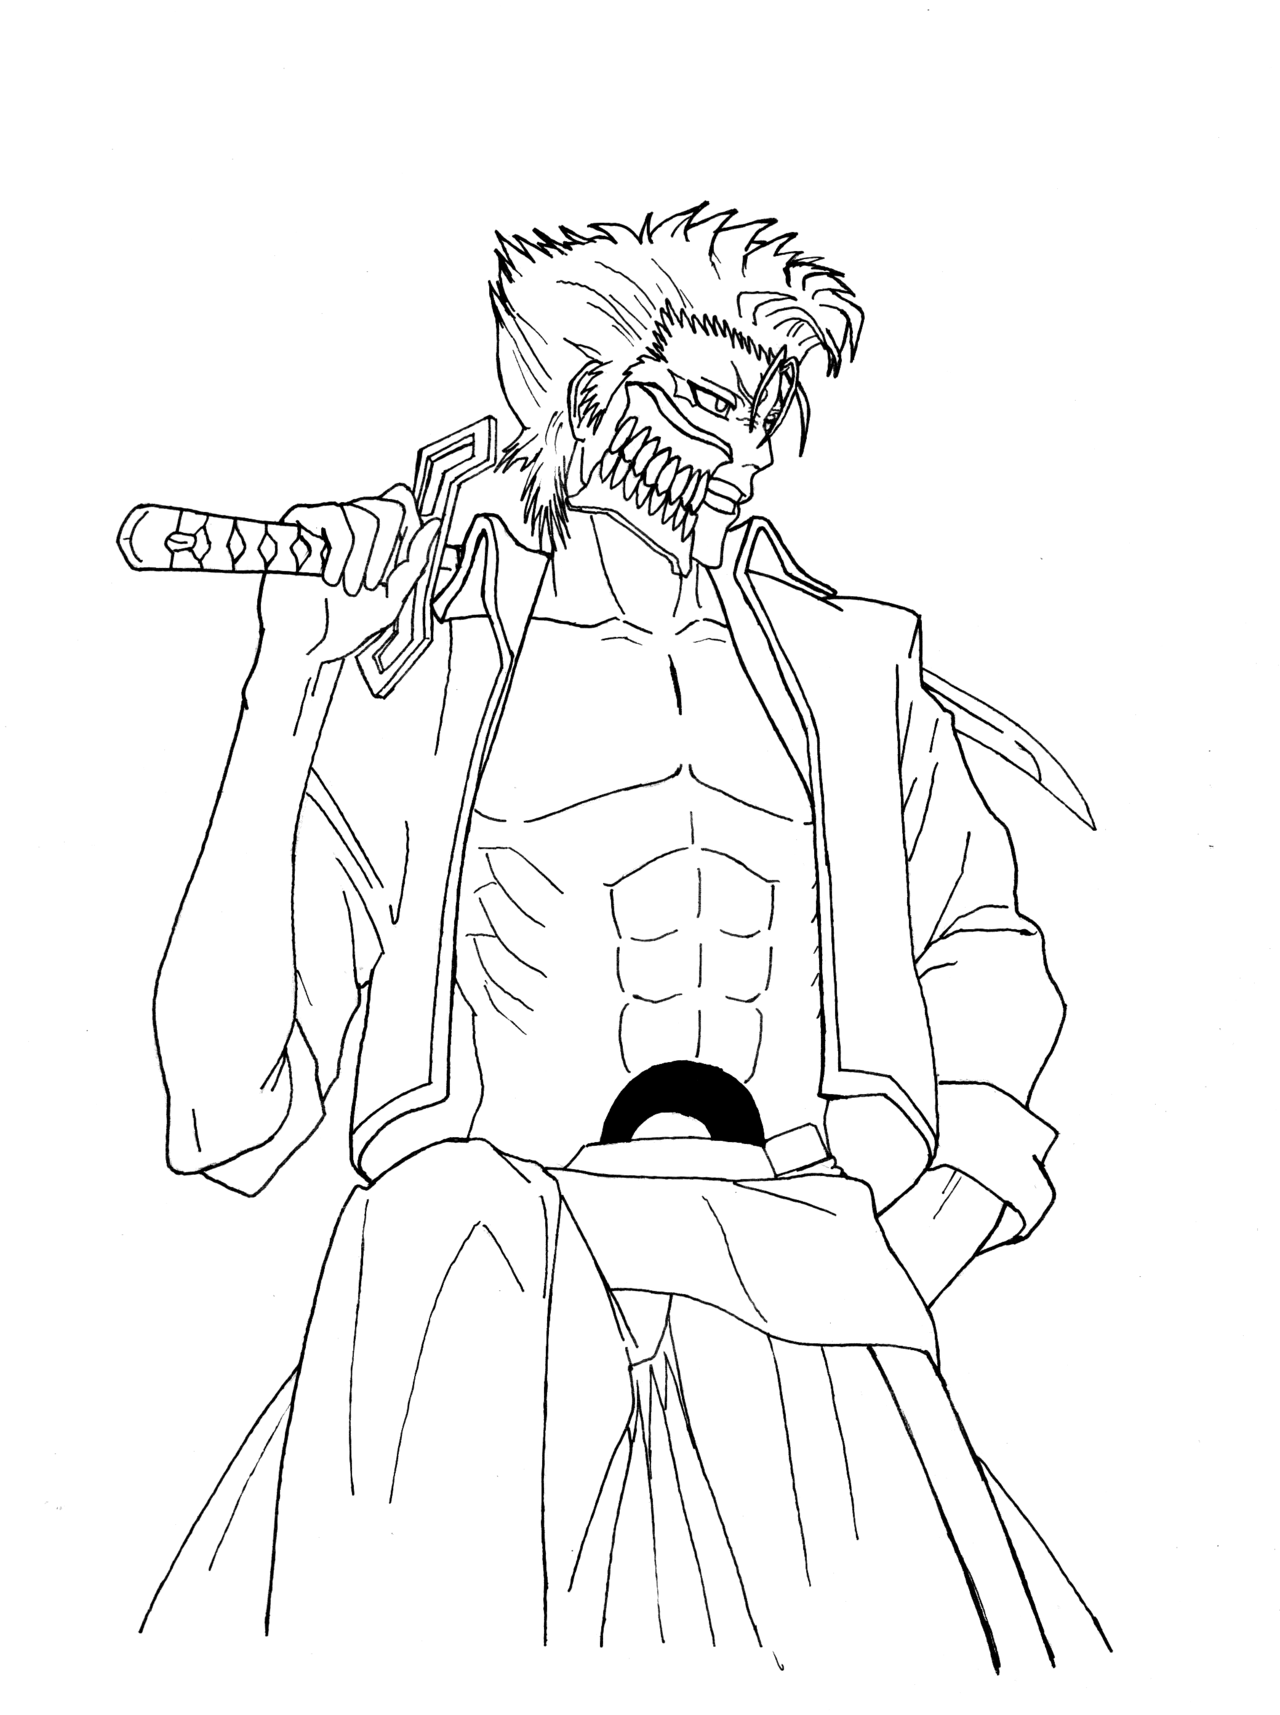 Bleach Grimmjow Coloring Pages - Coloring Home. 